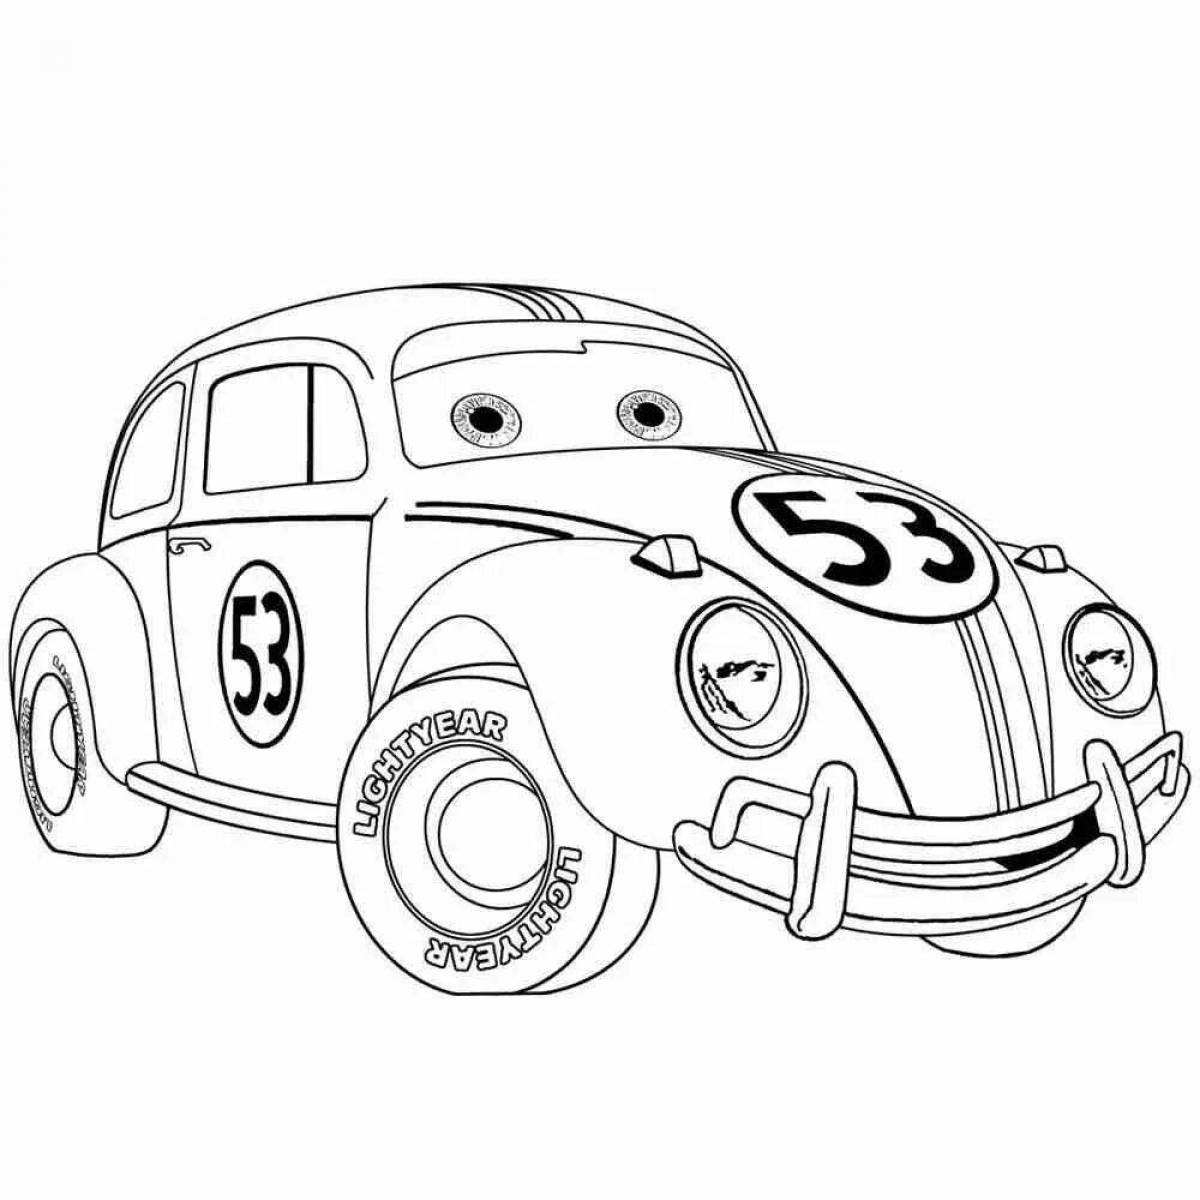 Glitter cars coloring pages